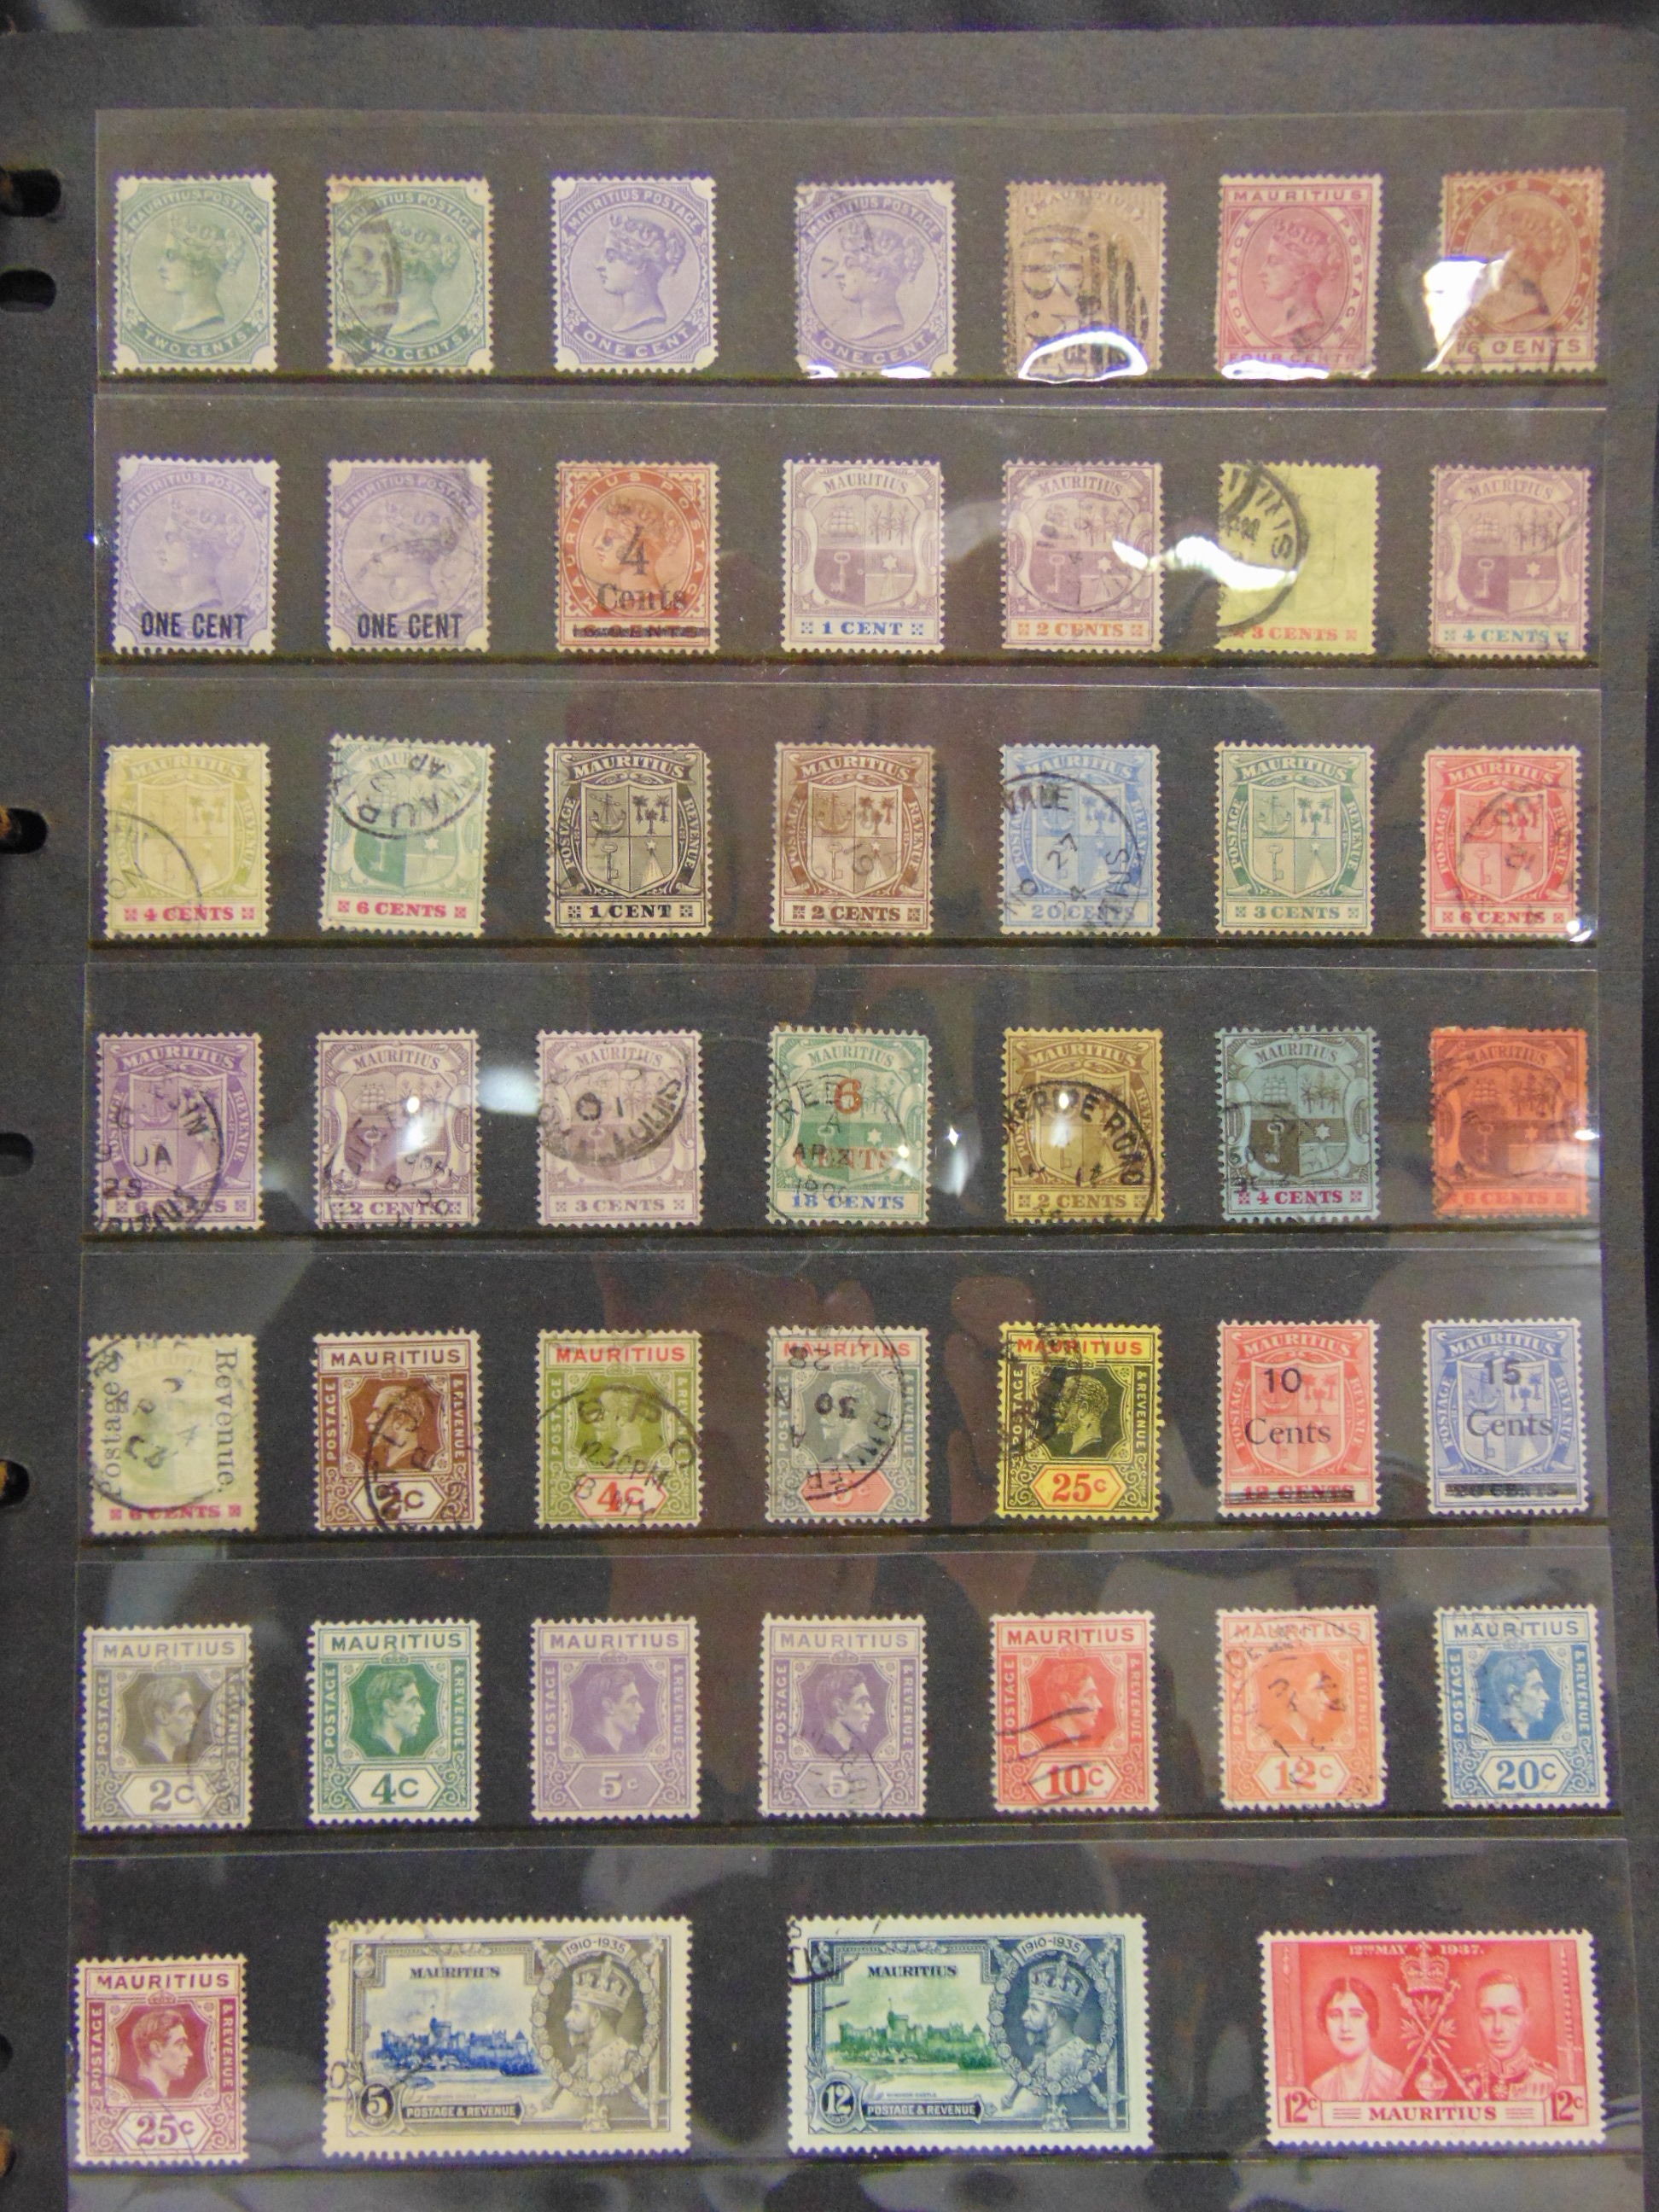 STAMPS - A PART-WORLD COLLECTION including India, Jamaica, Montserrat, Nyasaland / Malawi, Straits - Image 3 of 6